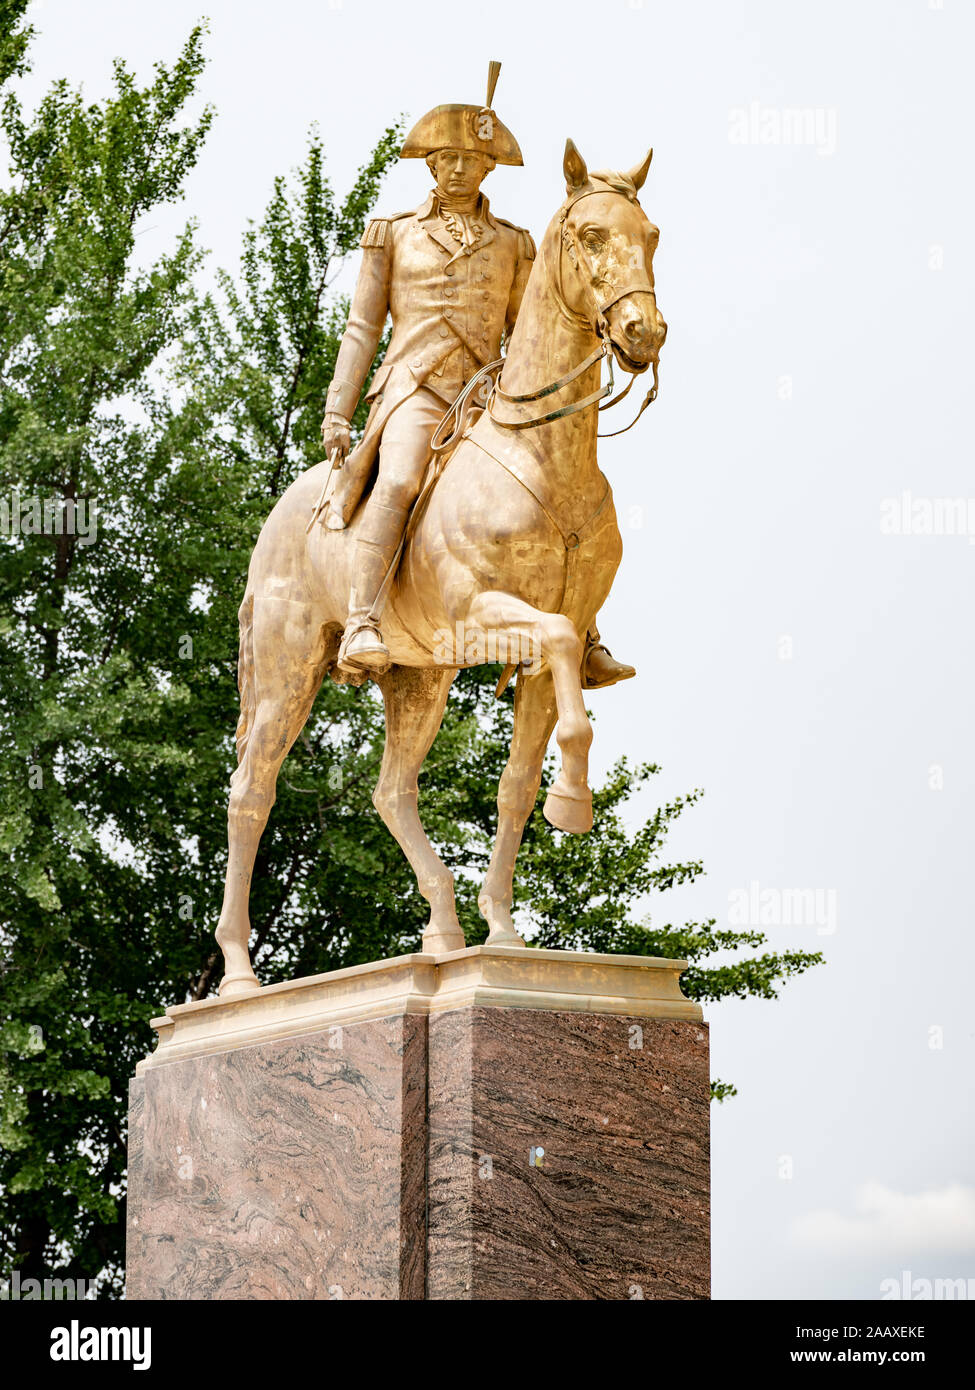 John Gregory's 1937 gilded bronze equestrian statue of Anthony Wayne,, US Army Officer and Statesman during the Revolutionary War. Stock Photo